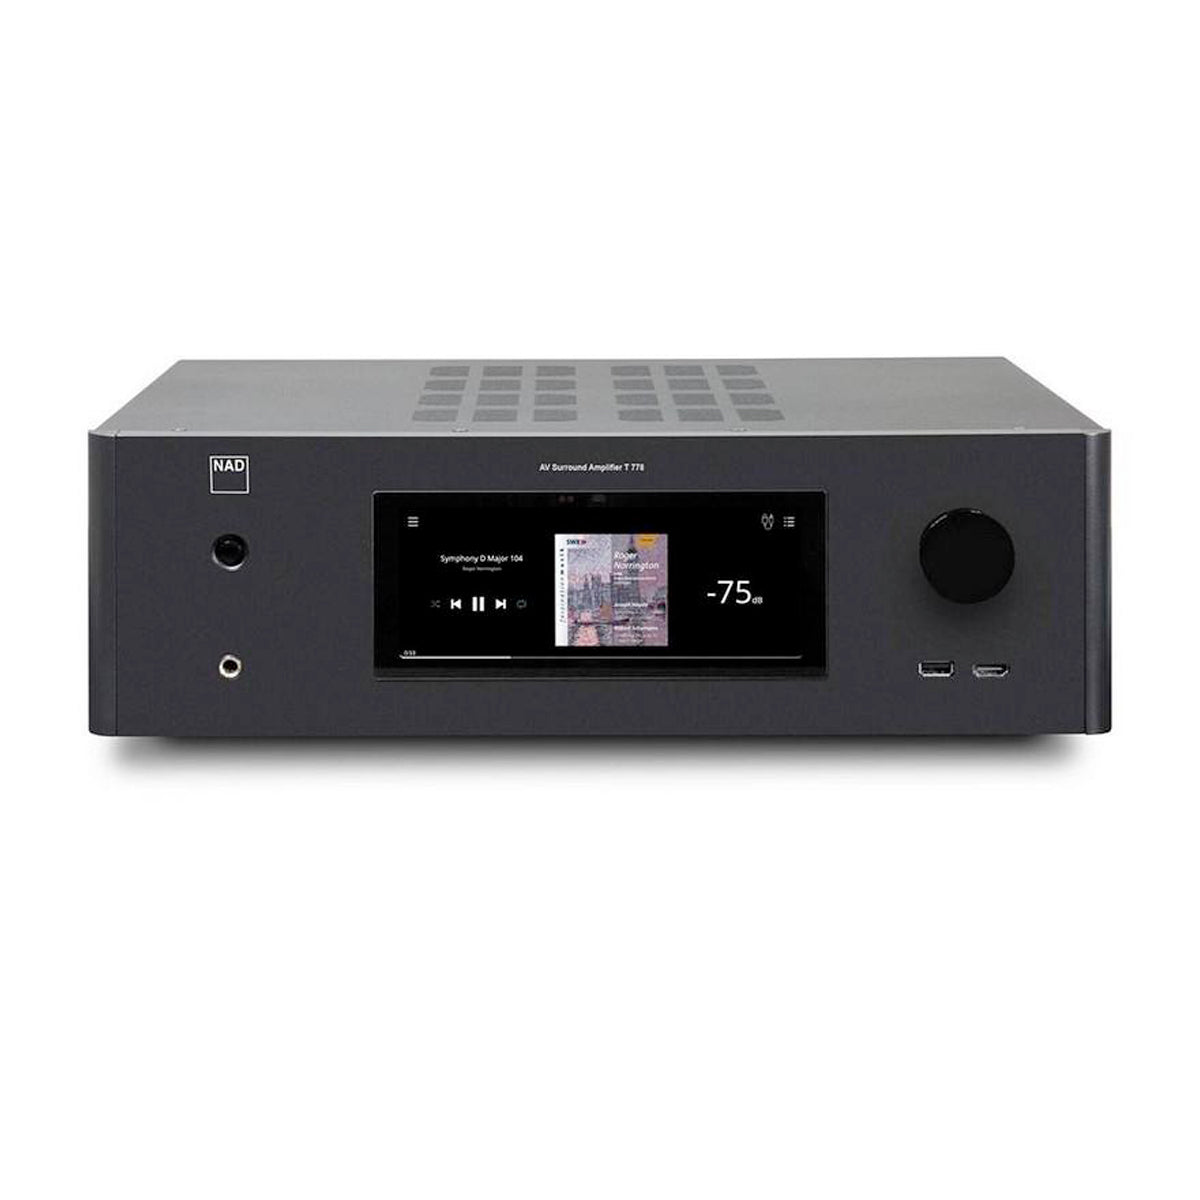 NAD T778 AV Receiver - The Audio Experts